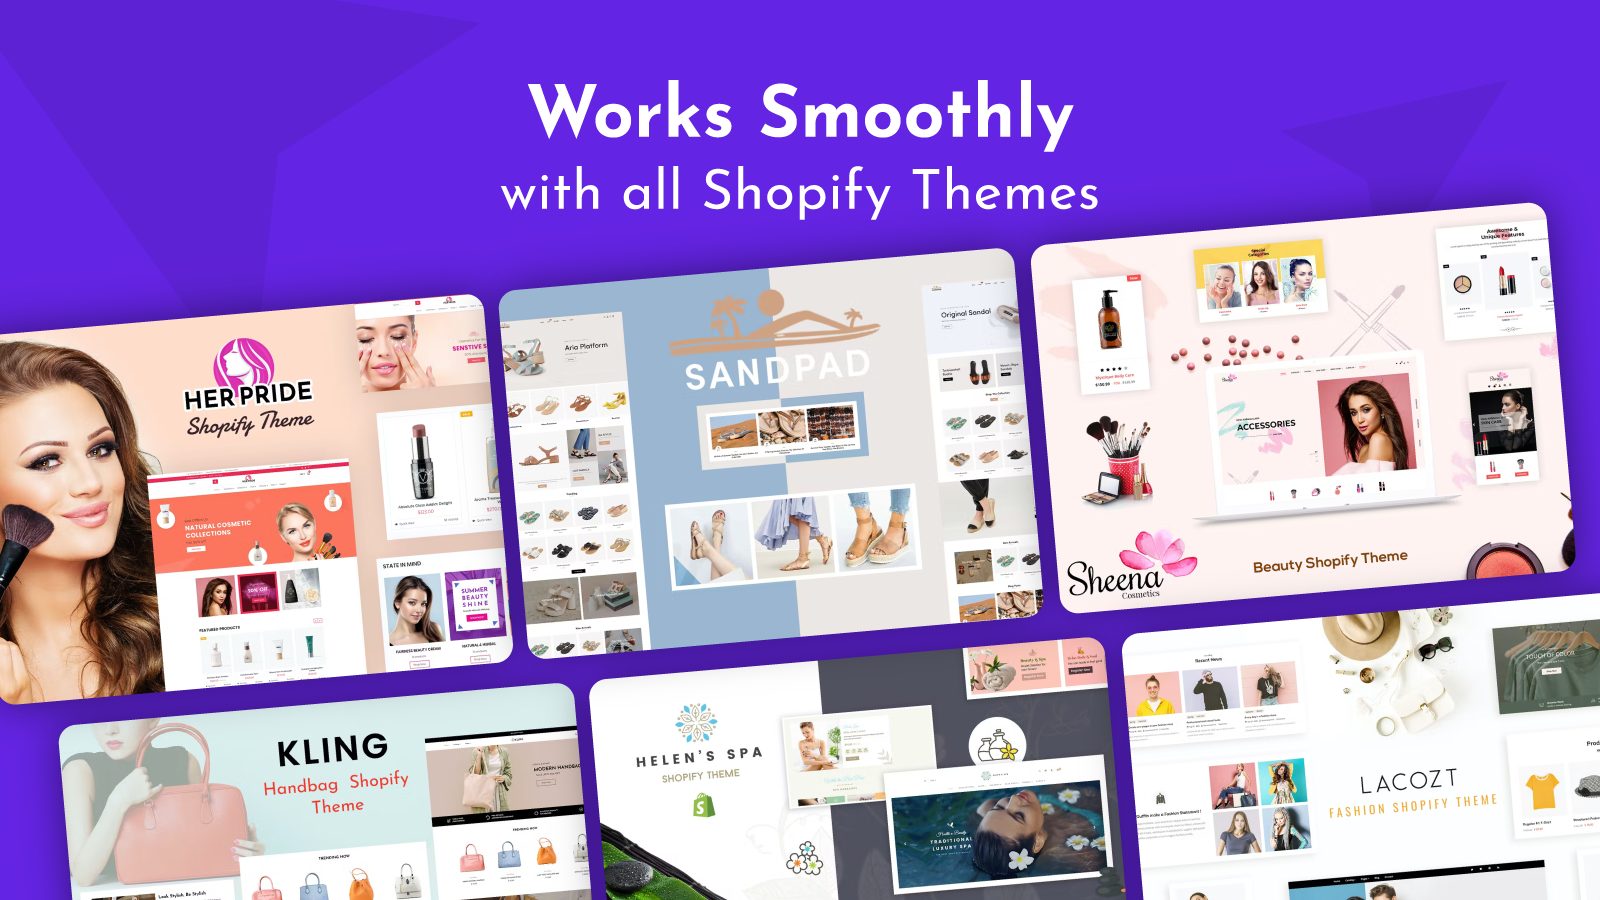 Checkout Hero Works Well with all Shopify Themes